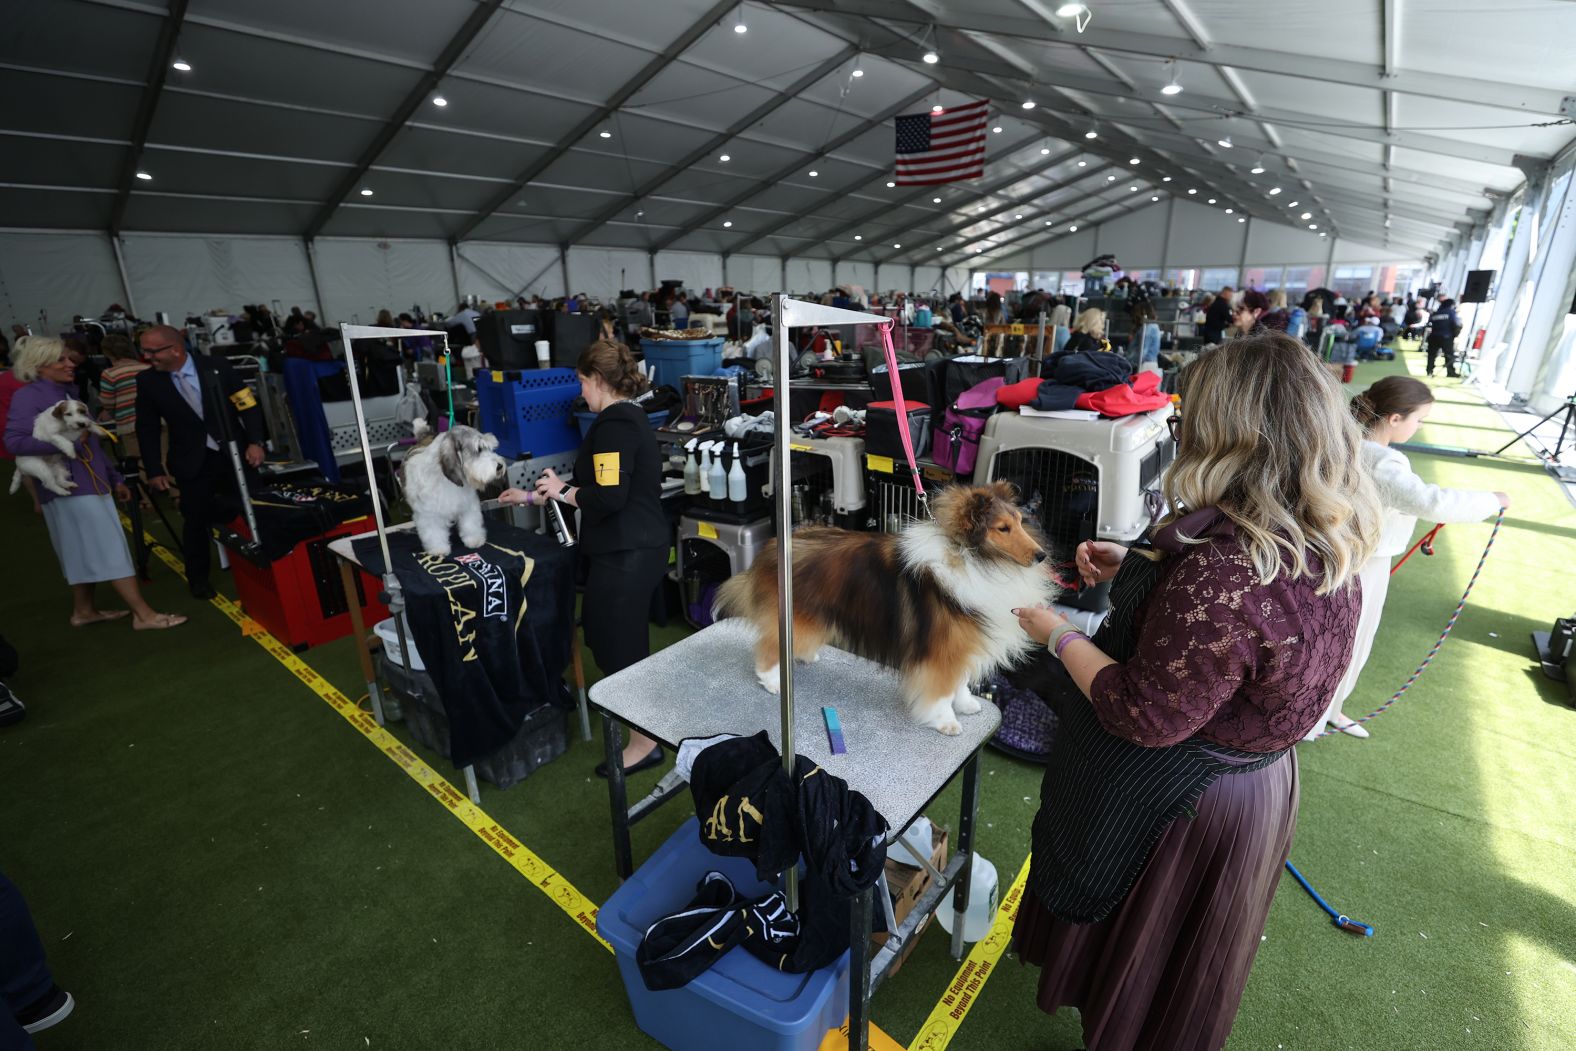 In pictures: The 148th Westminster Kennel Club Dog Show | CNN